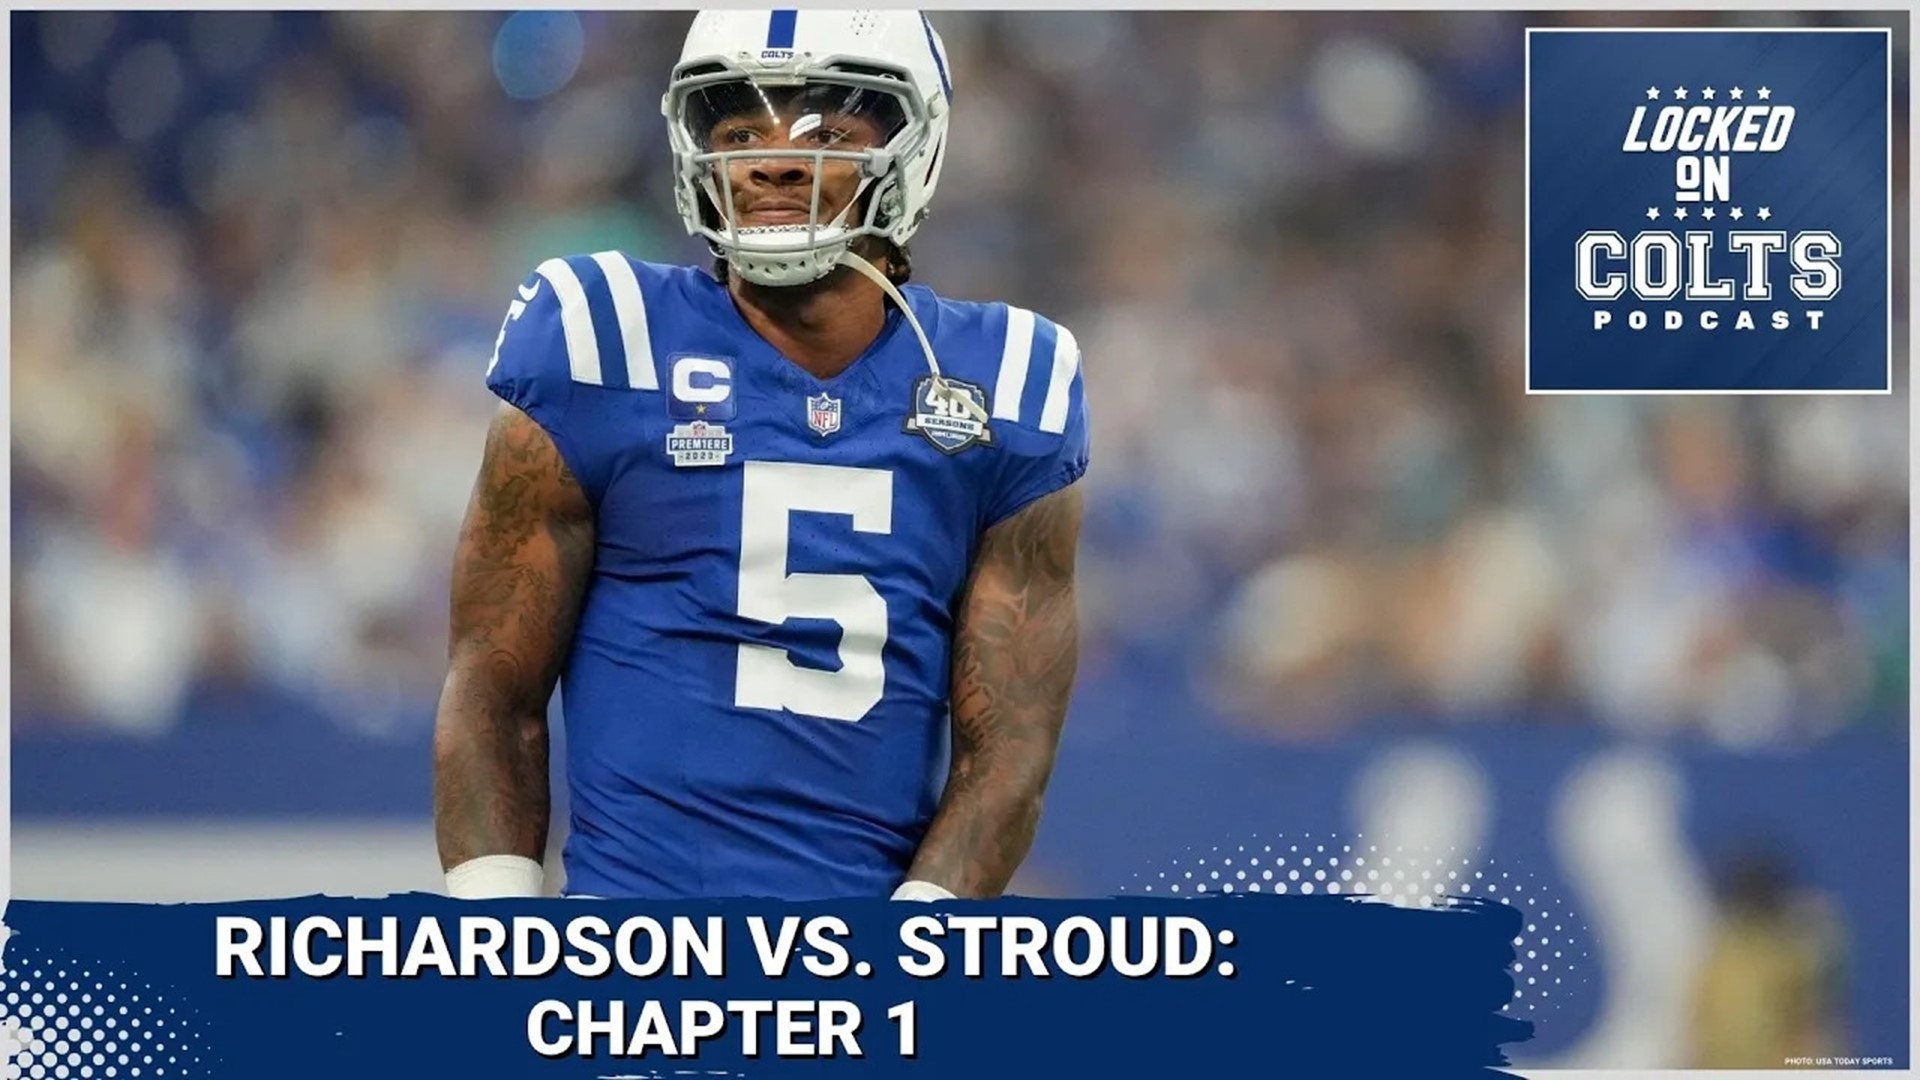 Rookie quarterbacks Anthony Richardson and C.J. Stroud face off for the first time as the Indianapolis Colts and Houston Texans go head-to-head.